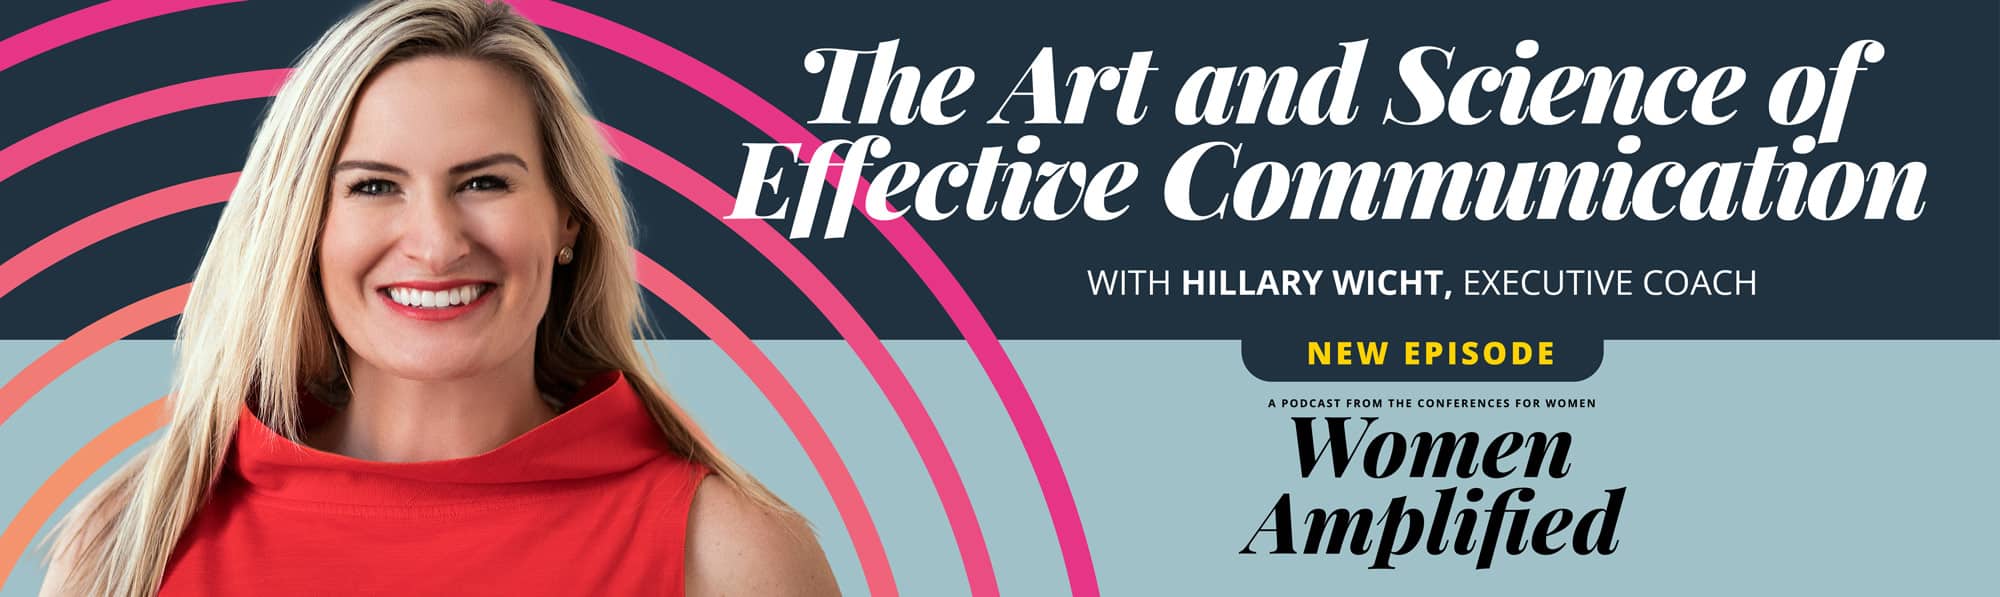 The Art & Science of Effective Communication with Hillary Wicht | Women Amplified Podcast